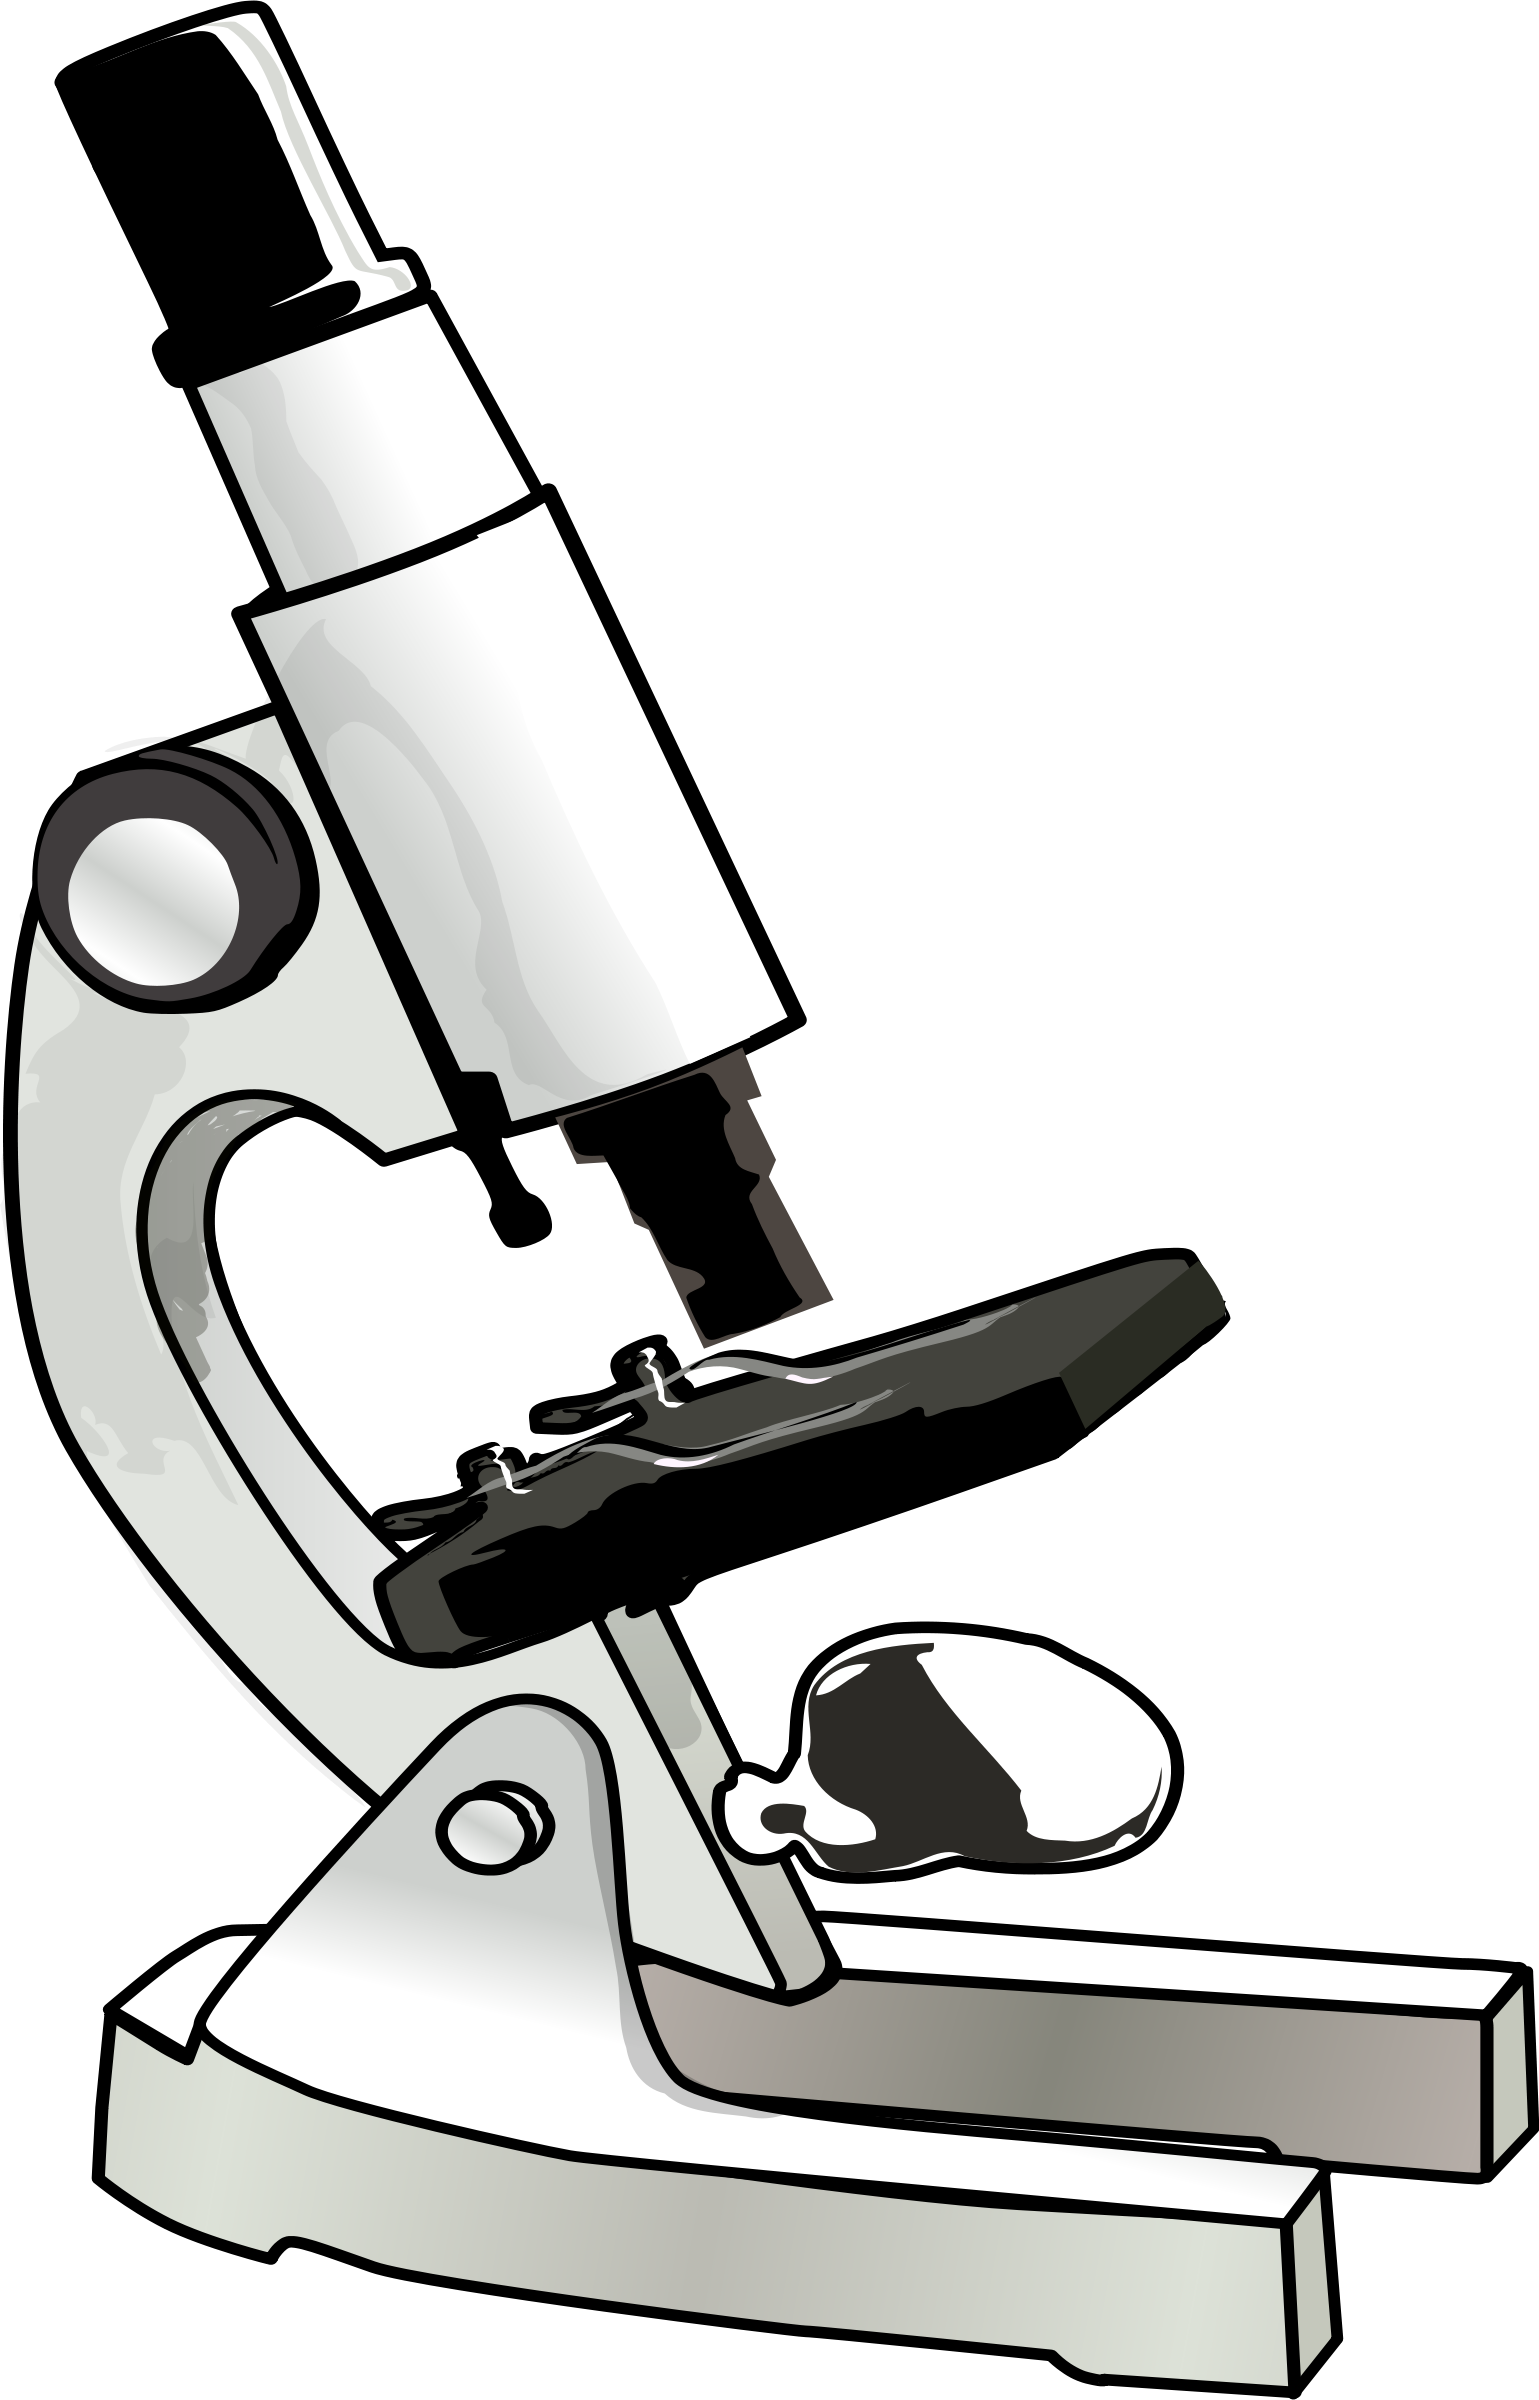 Clipart - Microscope | Clipart library - Free Clipart Images